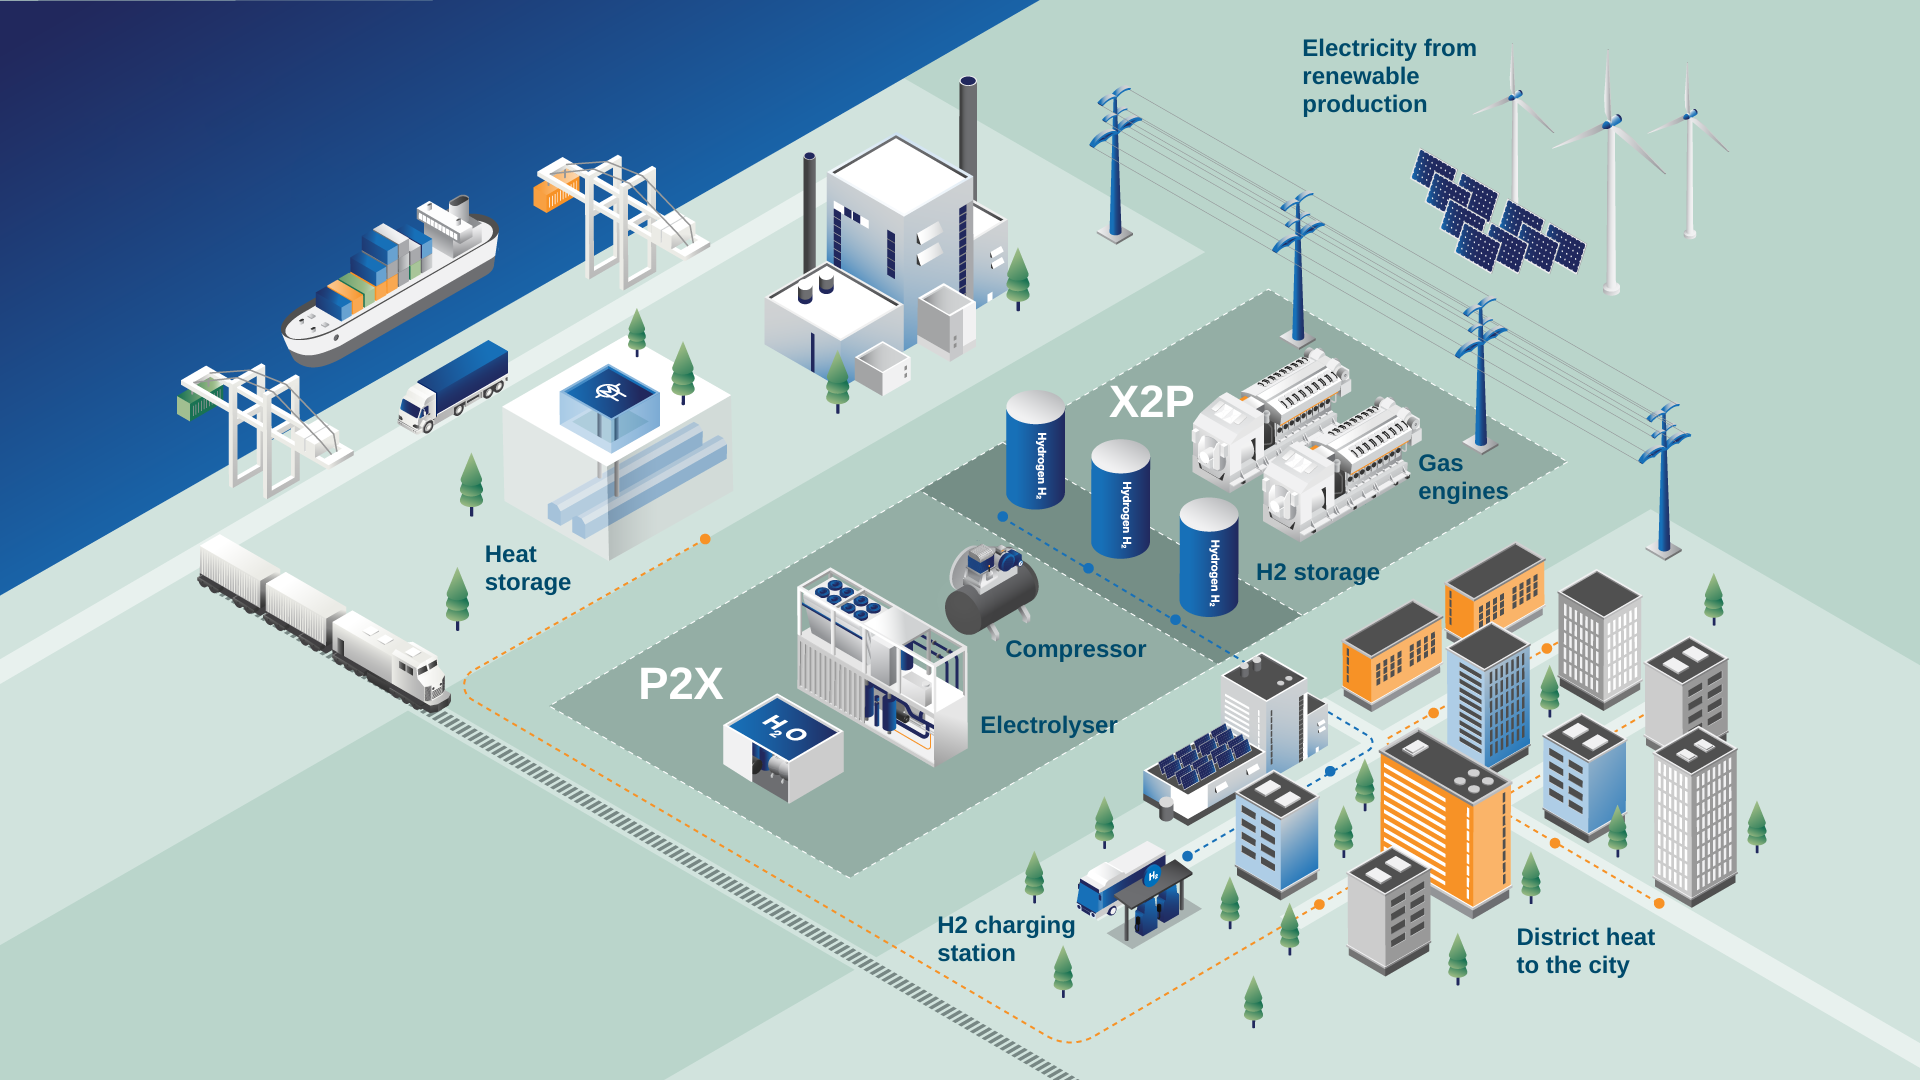 Power-to-X-to-Power system